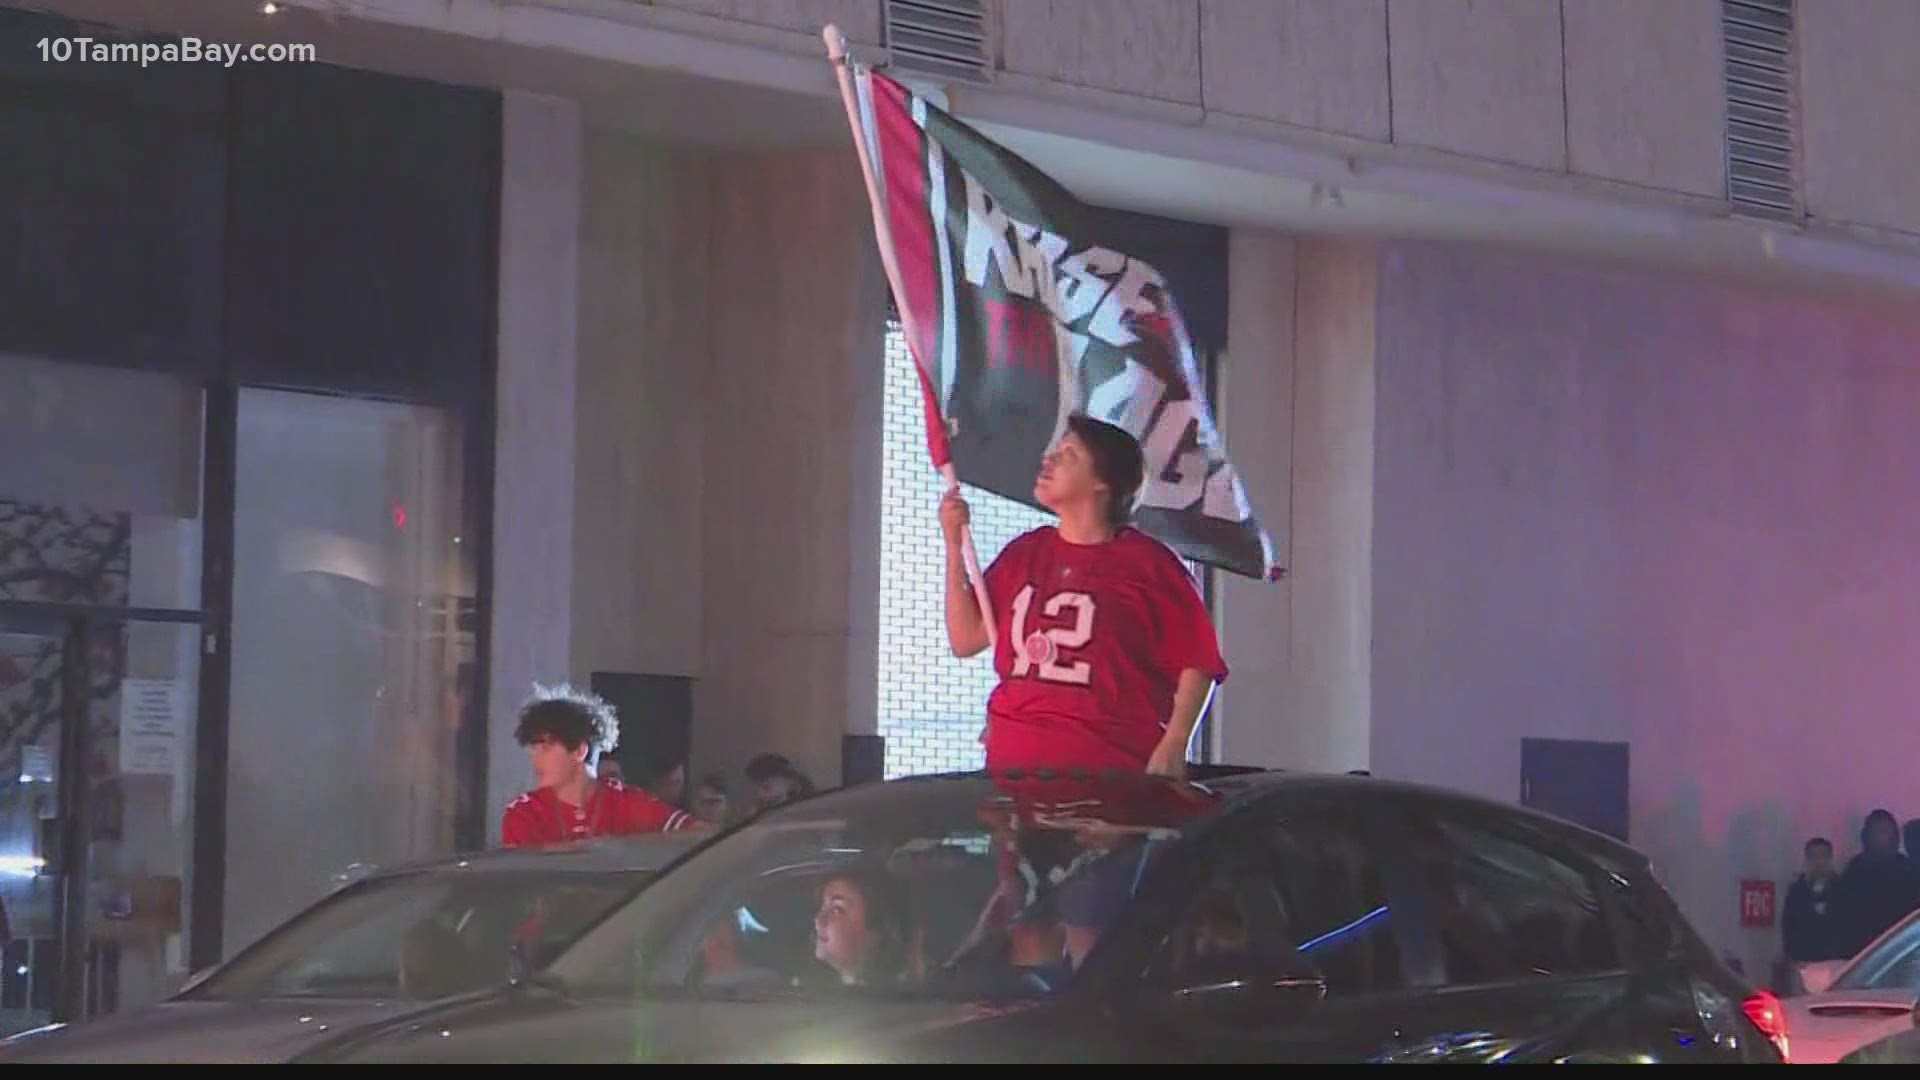 Bucs fans were out celebrating in Tampa until early this morning.